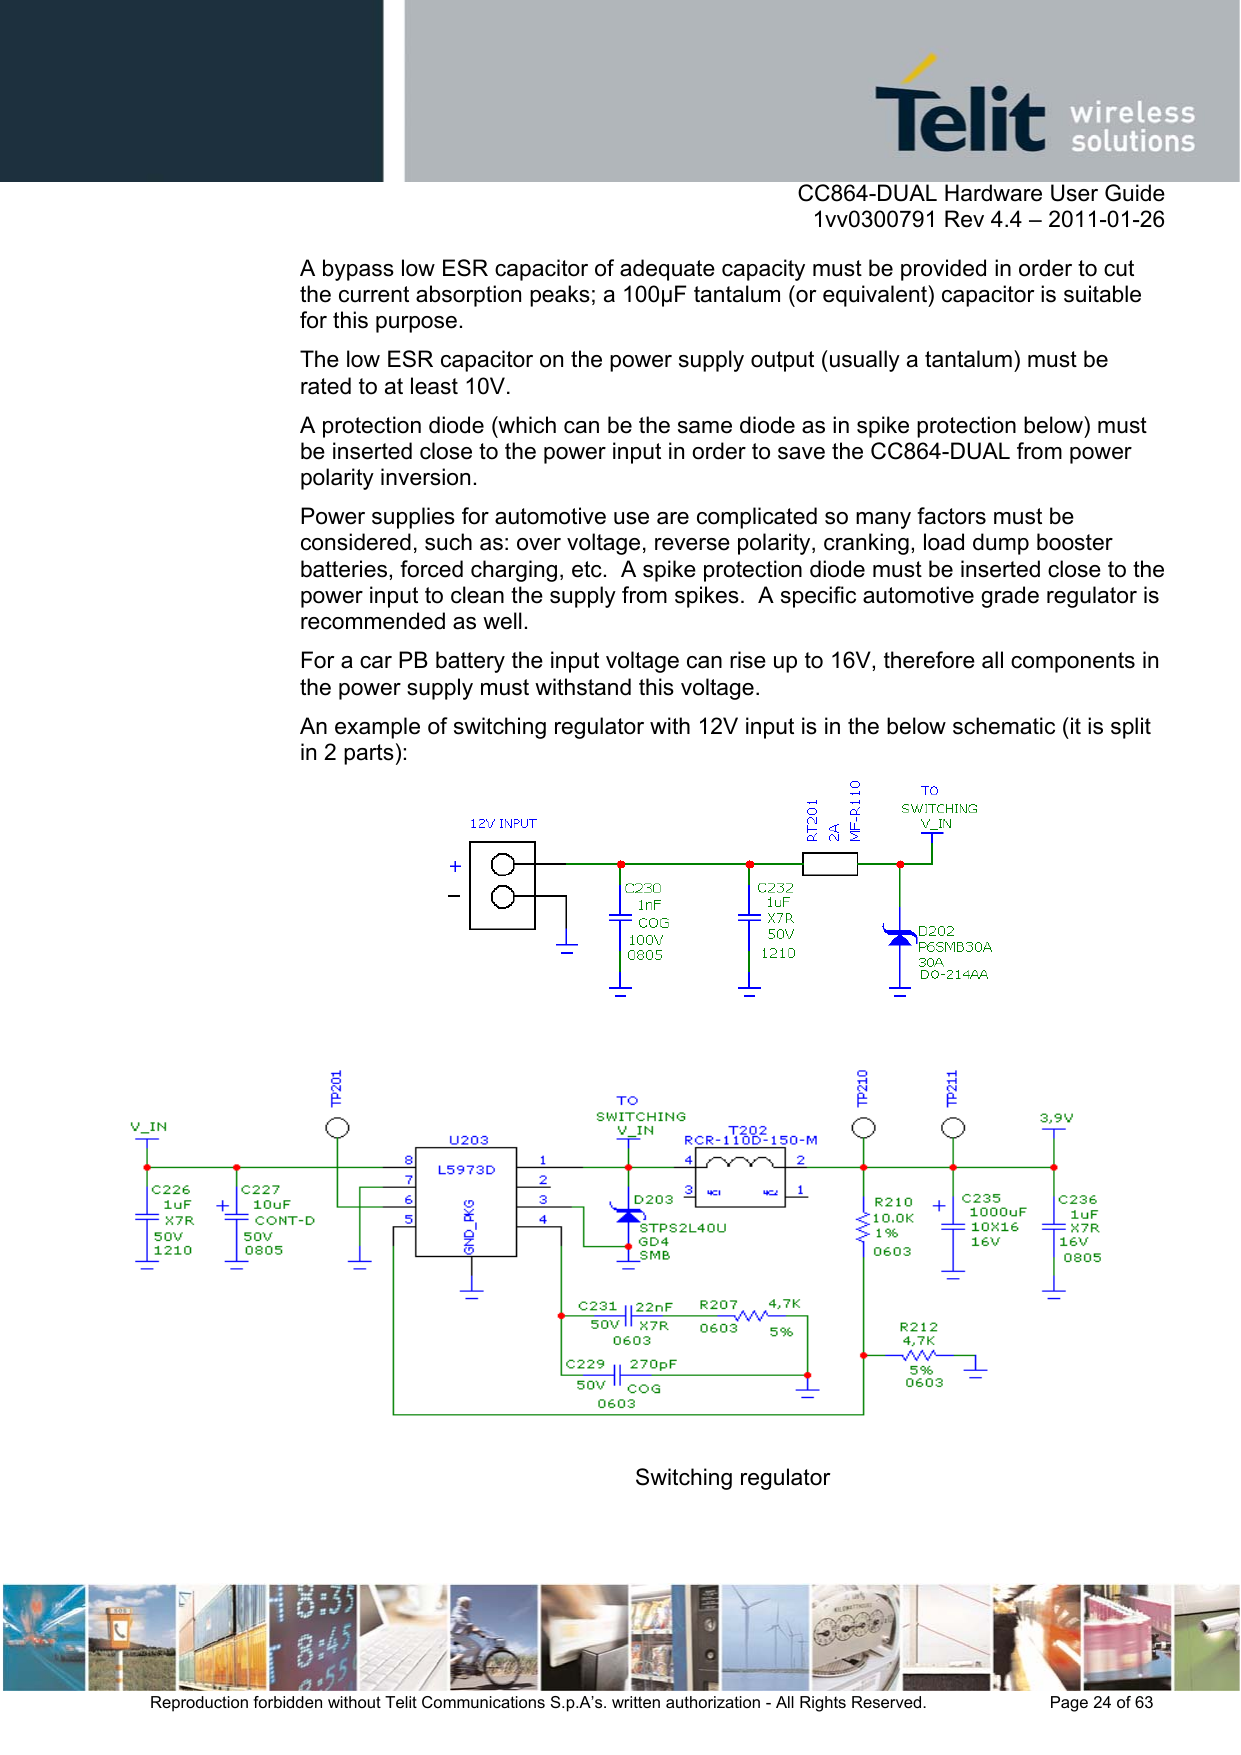      CC864-DUAL Hardware User Guide    1vv0300791 Rev 4.4 – 2011-01-26  Reproduction forbidden without Telit Communications S.p.A’s. written authorization - All Rights Reserved.    Page 24 of 63  A bypass low ESR capacitor of adequate capacity must be provided in order to cut the current absorption peaks; a 100µF tantalum (or equivalent) capacitor is suitable for this purpose. The low ESR capacitor on the power supply output (usually a tantalum) must be rated to at least 10V. A protection diode (which can be the same diode as in spike protection below) must be inserted close to the power input in order to save the CC864-DUAL from power polarity inversion. Power supplies for automotive use are complicated so many factors must be considered, such as: over voltage, reverse polarity, cranking, load dump booster batteries, forced charging, etc.  A spike protection diode must be inserted close to the power input to clean the supply from spikes.  A specific automotive grade regulator is recommended as well. For a car PB battery the input voltage can rise up to 16V, therefore all components in the power supply must withstand this voltage.  An example of switching regulator with 12V input is in the below schematic (it is split in 2 parts):  Switching regulator 